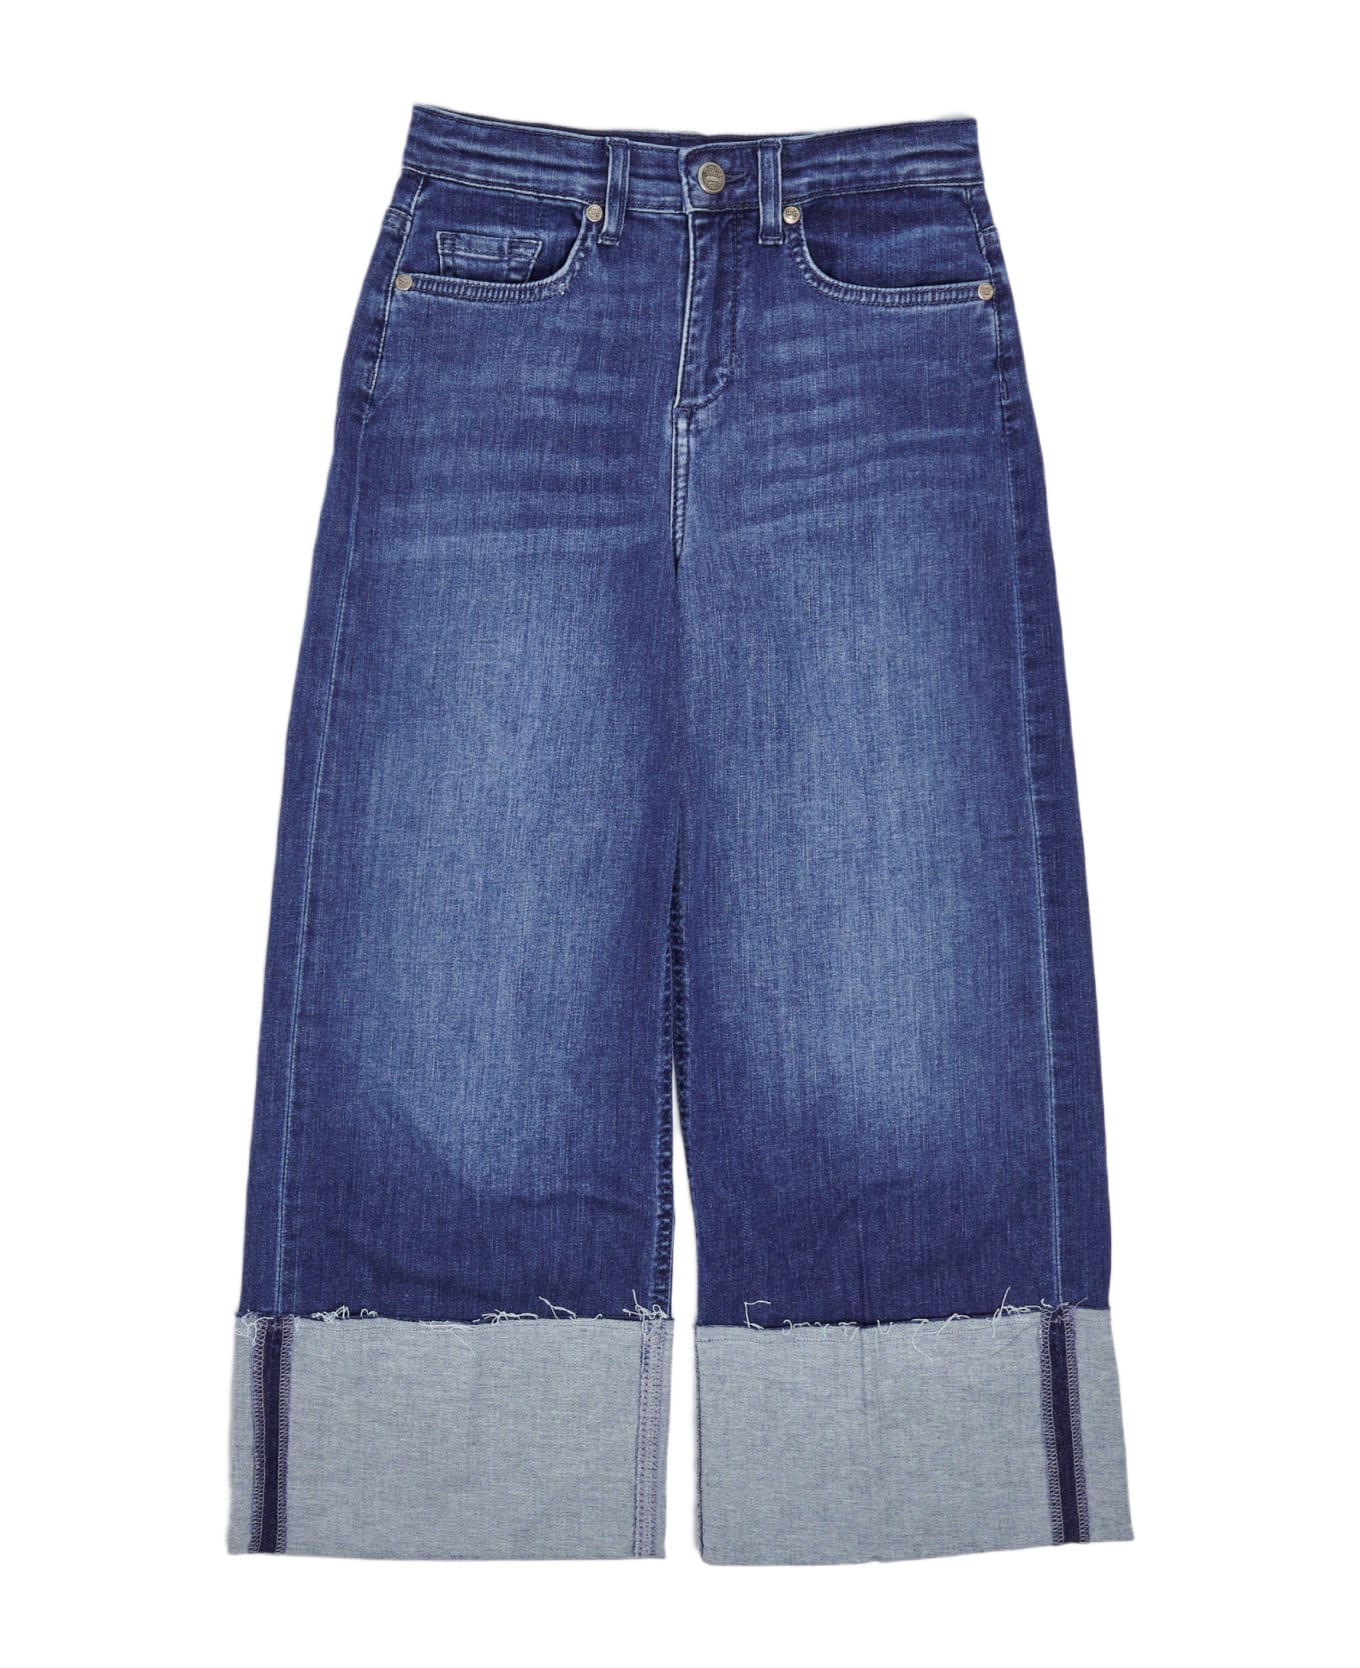 Liu-Jo Jeans Betty Authent Straight Jeans - DENIM SCURO ボトムス